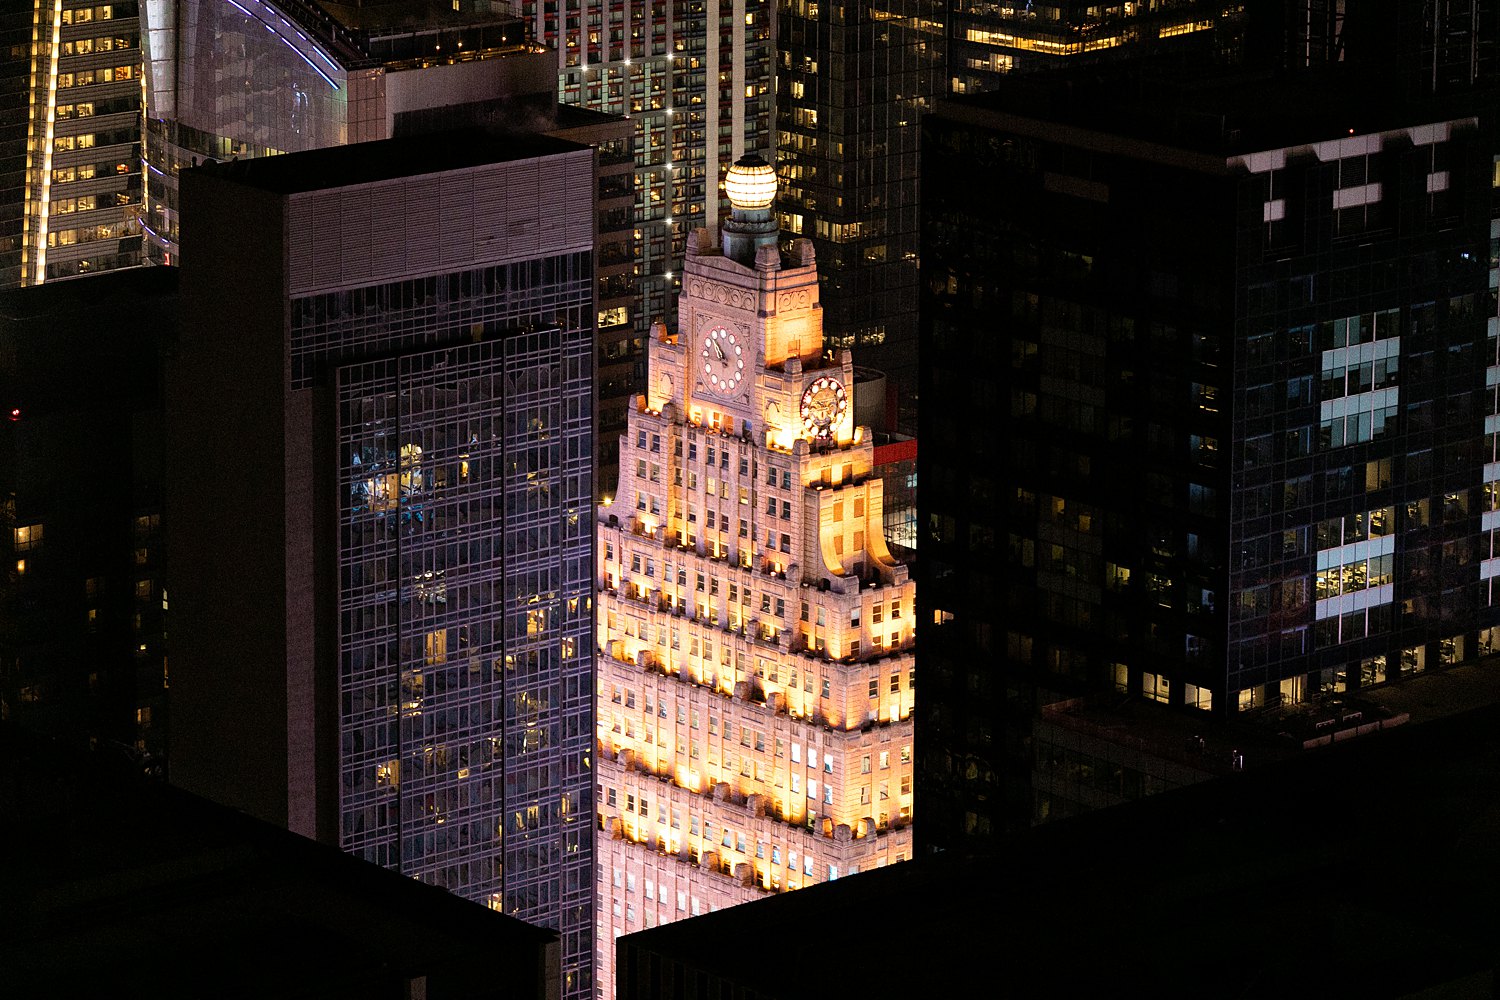 Times square building at night illuminated NYC places to visit in new york